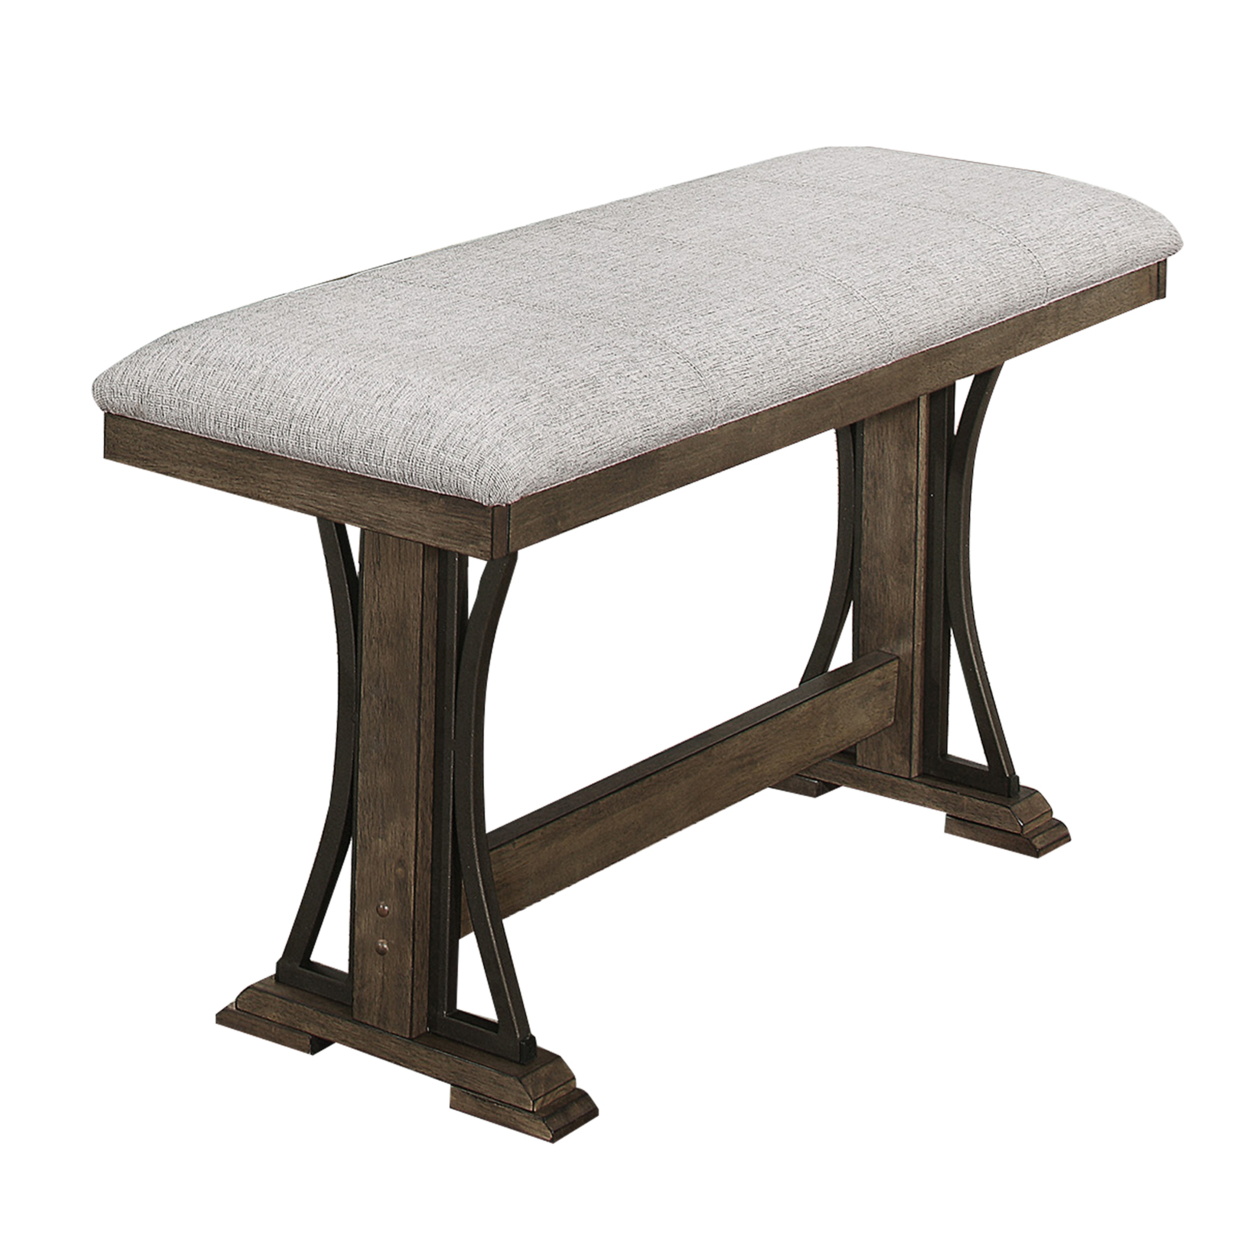 Counter Height Fabric Upholstered Bench With Trestle Base, Brown And Gray- Saltoro Sherpi